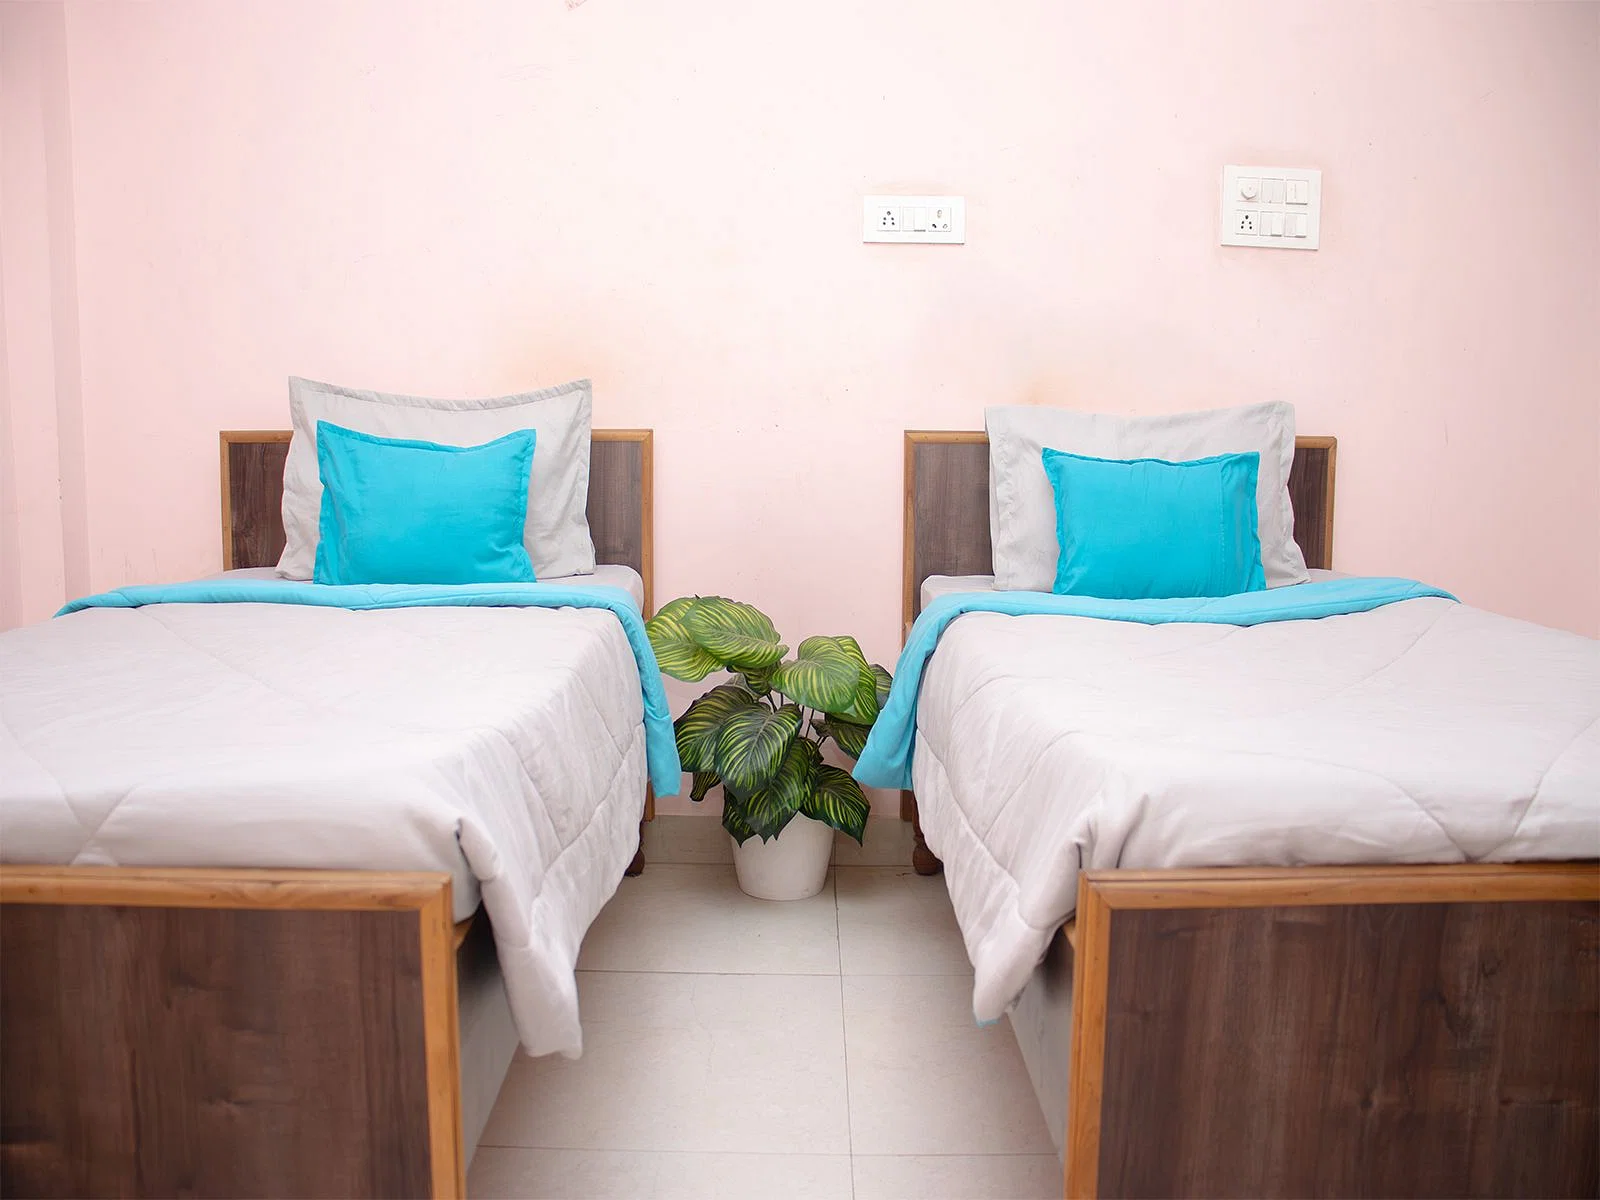 budget-friendly PGs and hostels for men and women with single rooms with daily hopusekeeping-Zolo Aloha